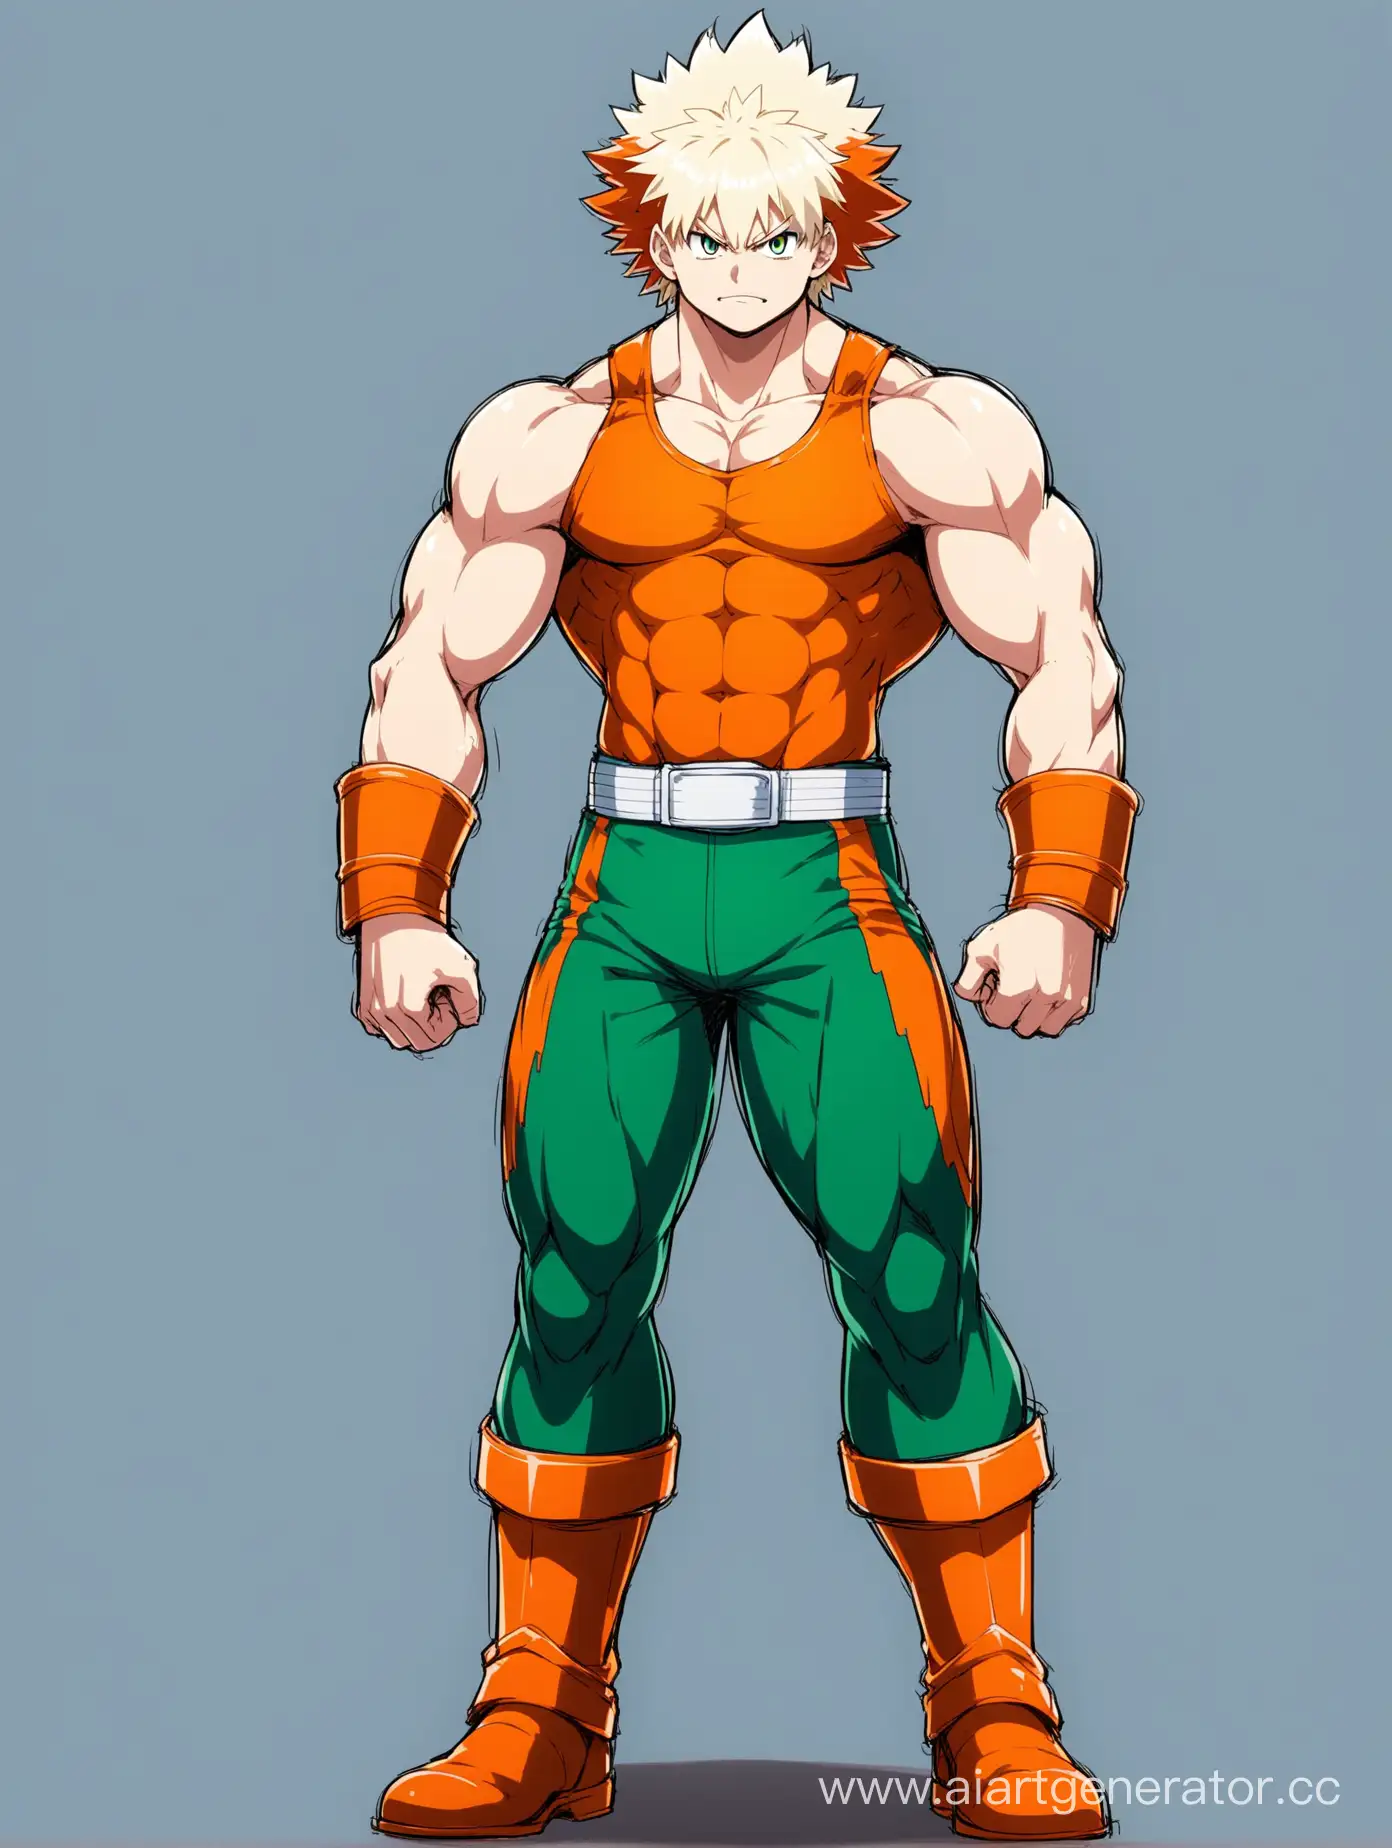 Bakugo from the anime My Hero Academy muscles
full height